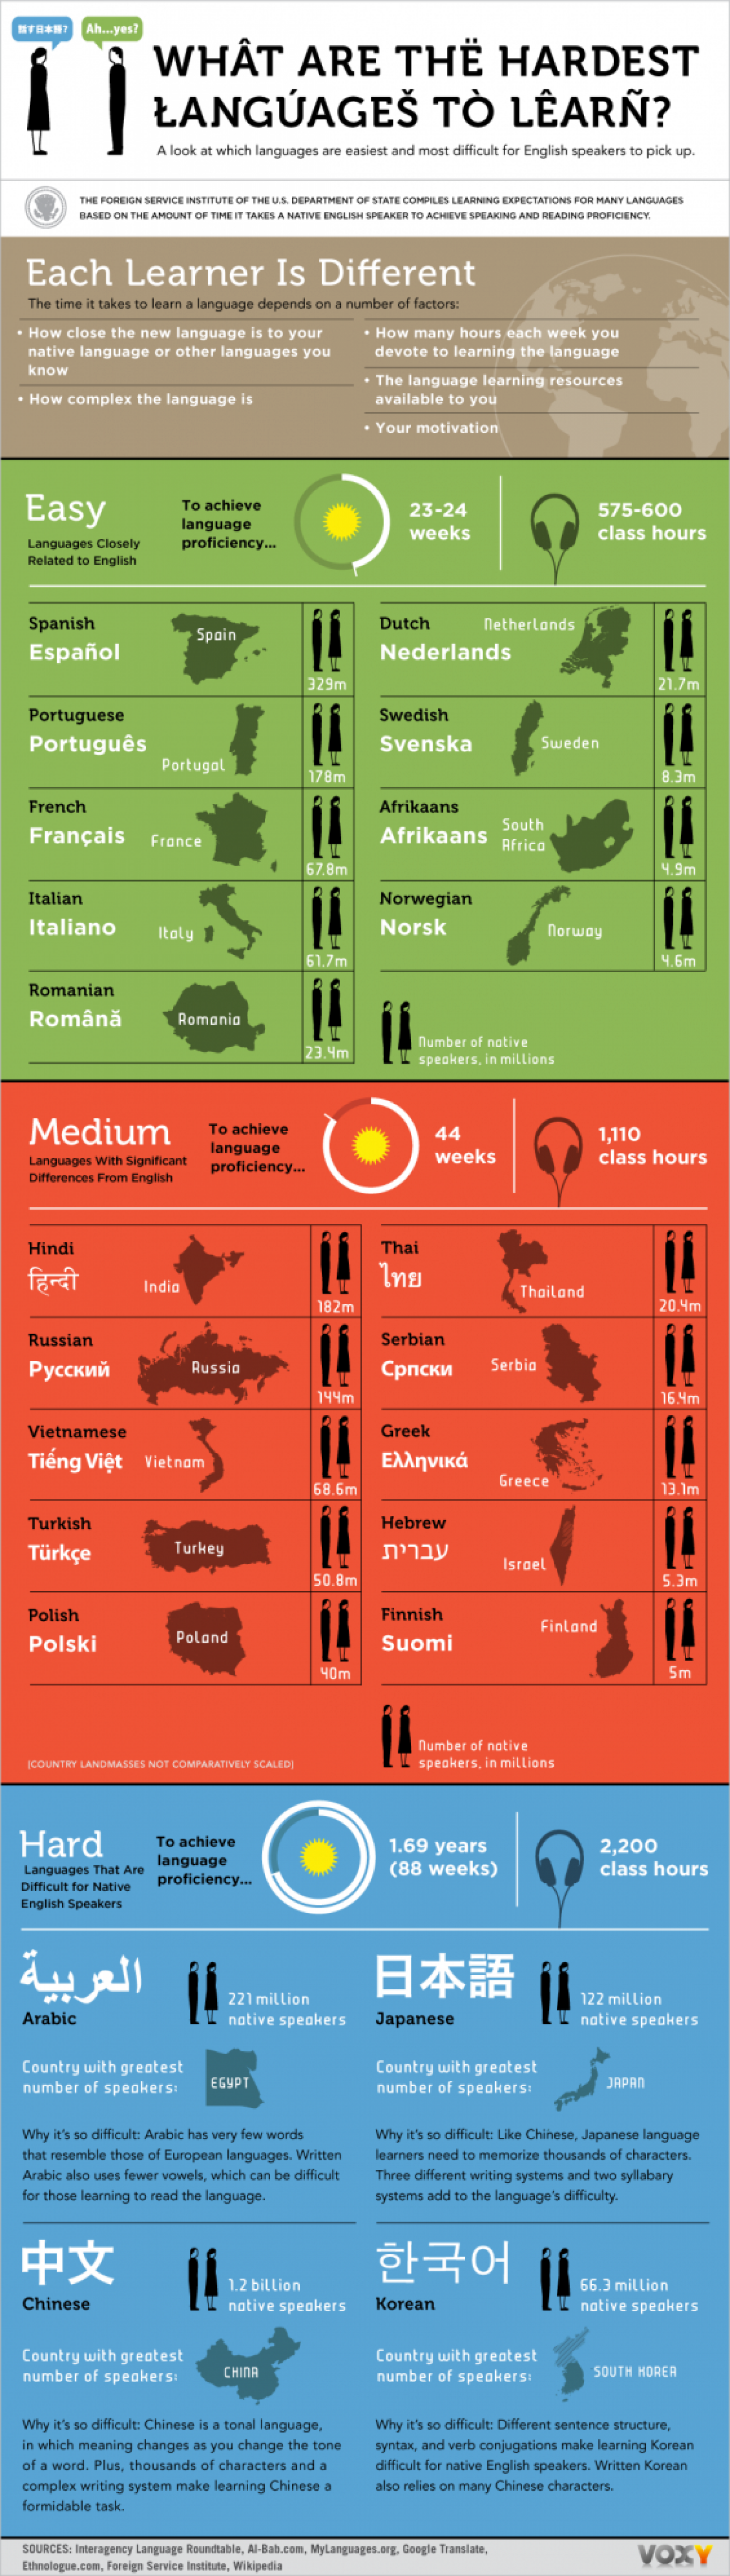 What Are The Hardest Languages to Learn? Infographic